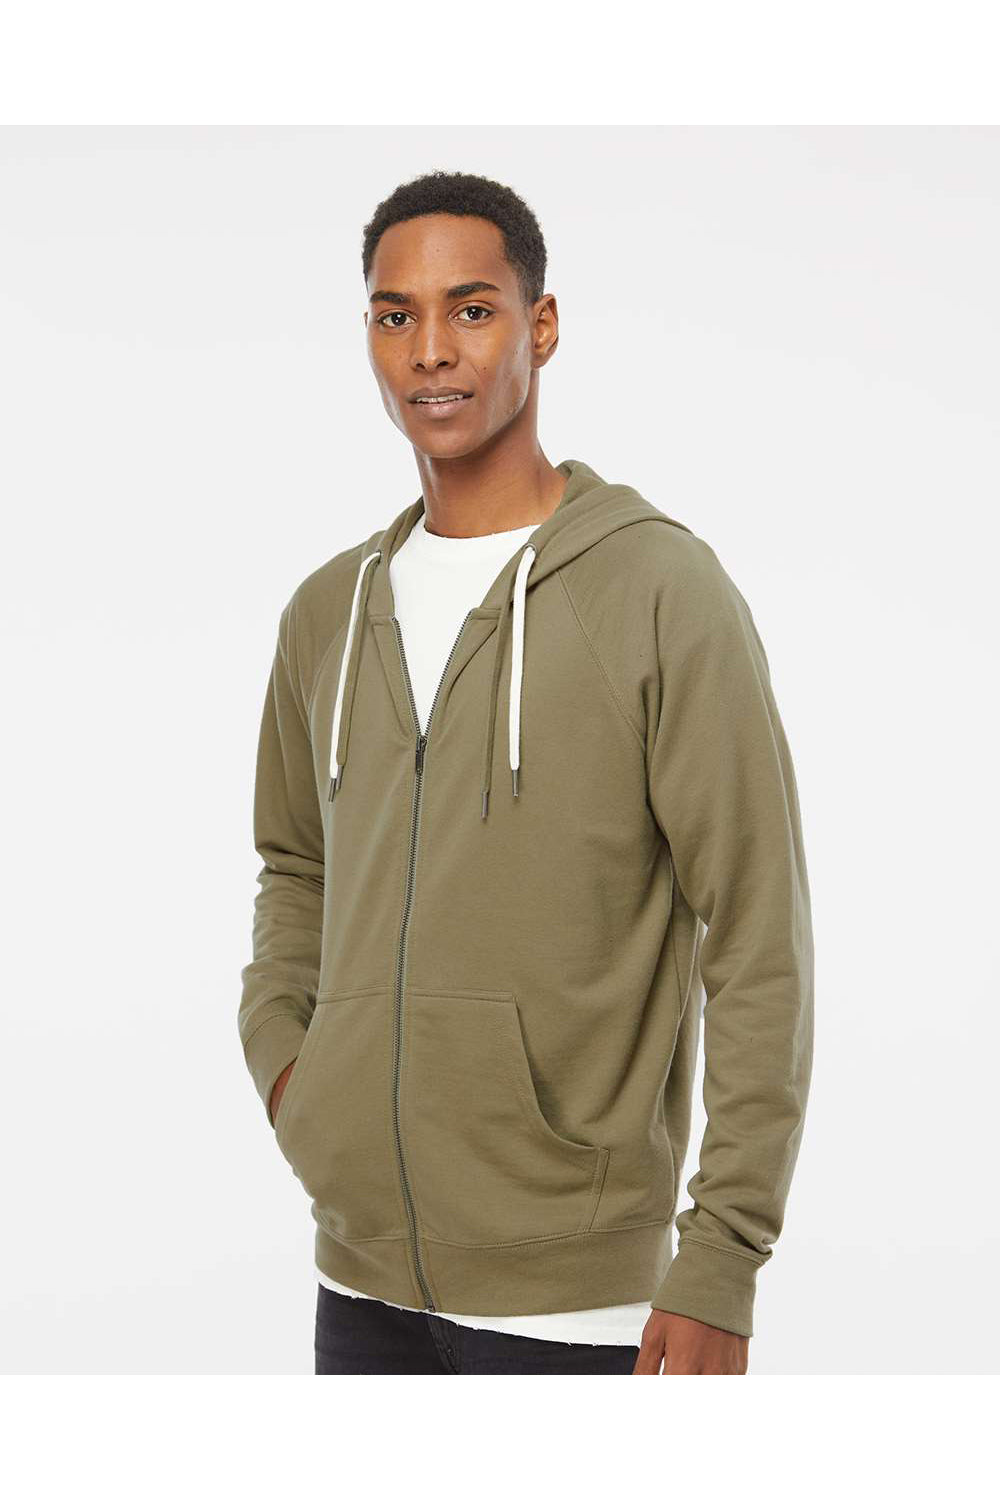 Independent Trading Co. SS1000Z Mens Icon Loopback Terry Full Zip Hooded Sweatshirt Hoodie Olive Green Model Side